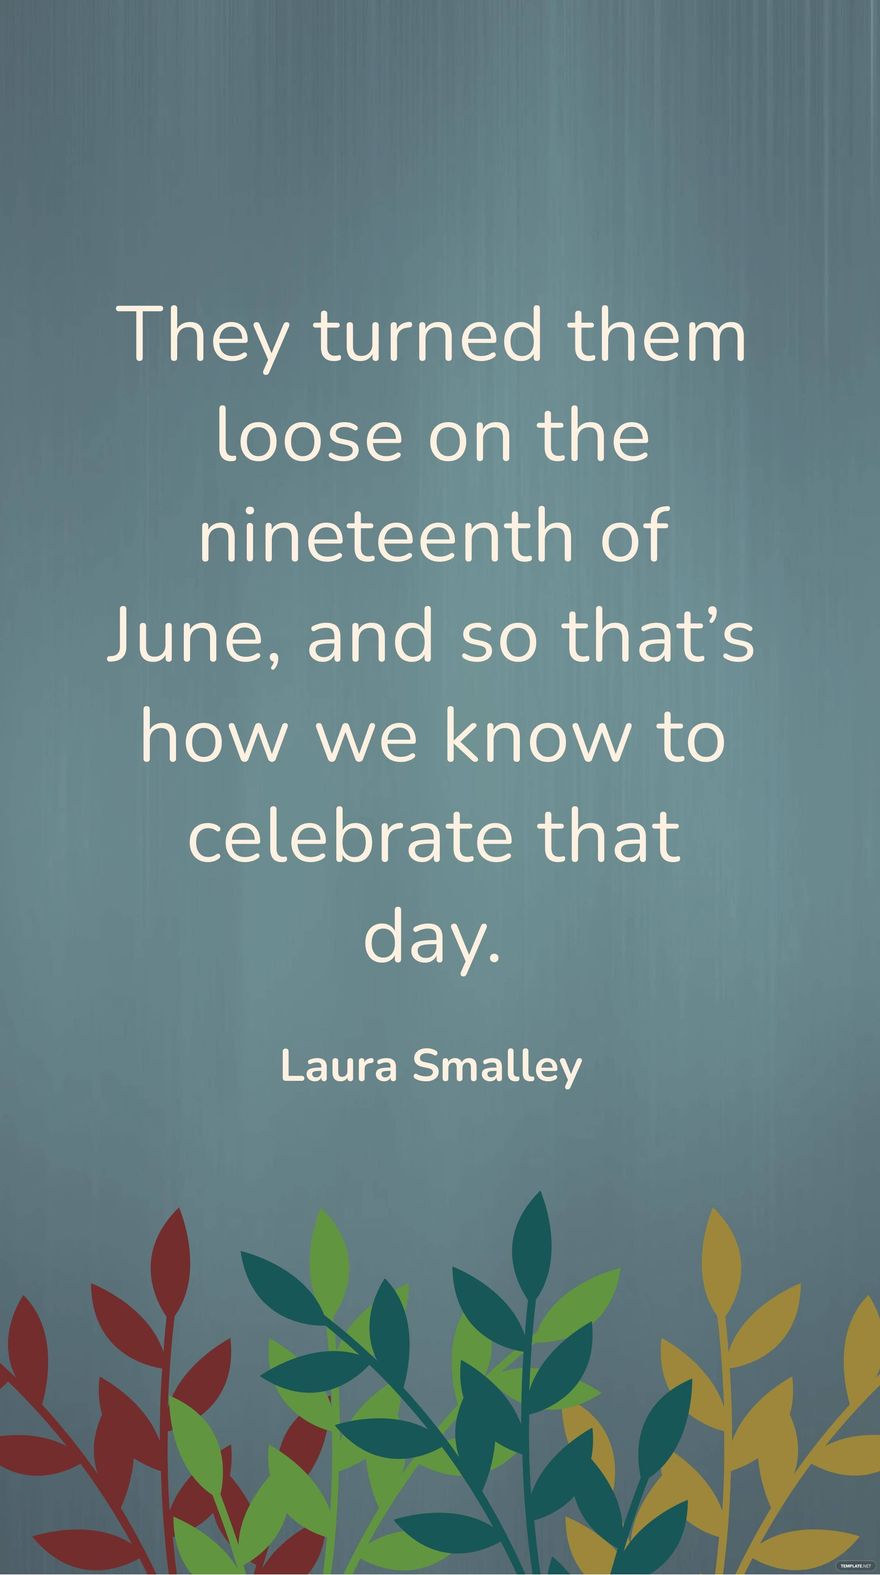 Free Laura Smalley - They turned them loose on the nineteenth of June, and so that’s how we know to celebrate that day.